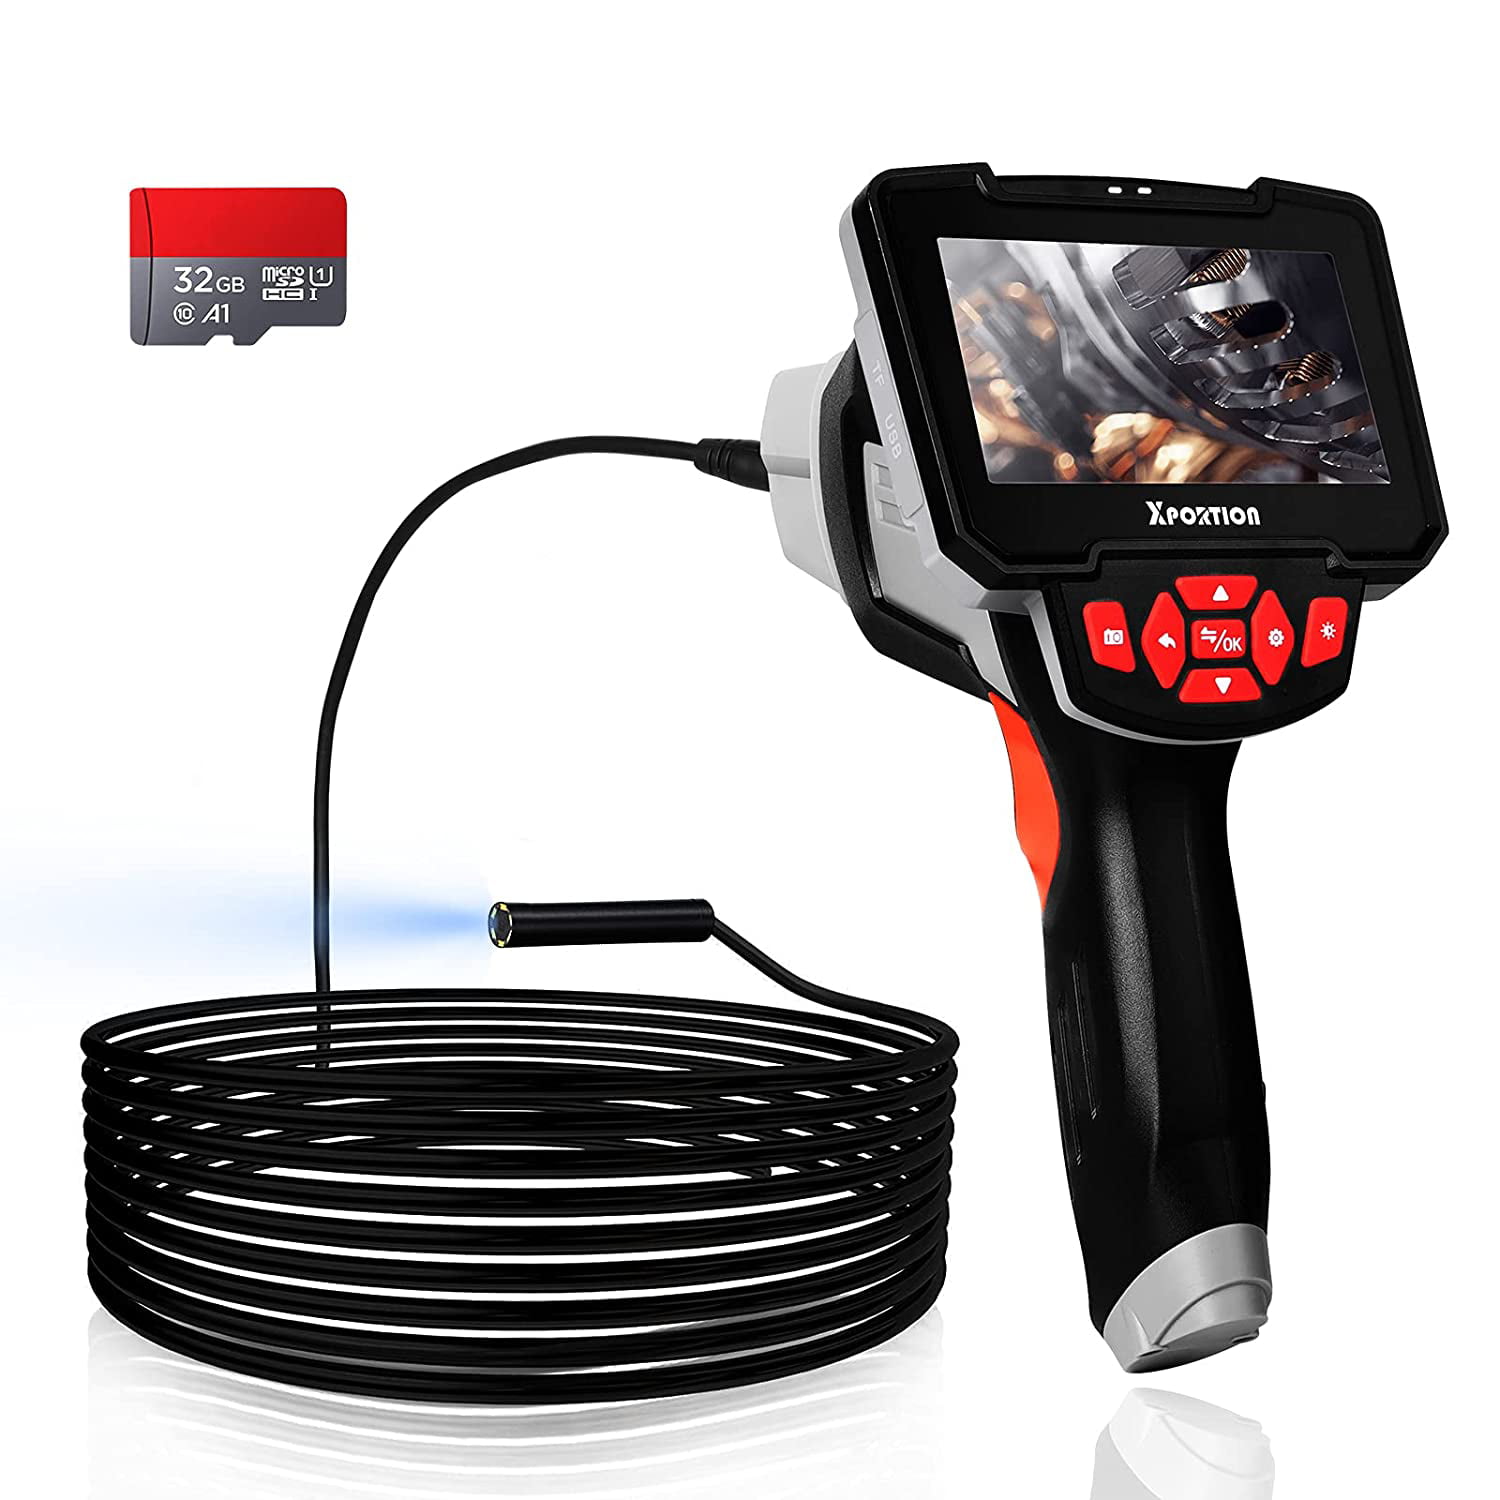 33FT Dual Lens Industrial Endoscope Camera 4.3 inch LCD Screen 1080P Borescope Inspection Camera IP67 Waterproof Semi-Rigid Cable Endoscope with 32G TF Card 33FT//10m 2600mAh Rechargeable Battery